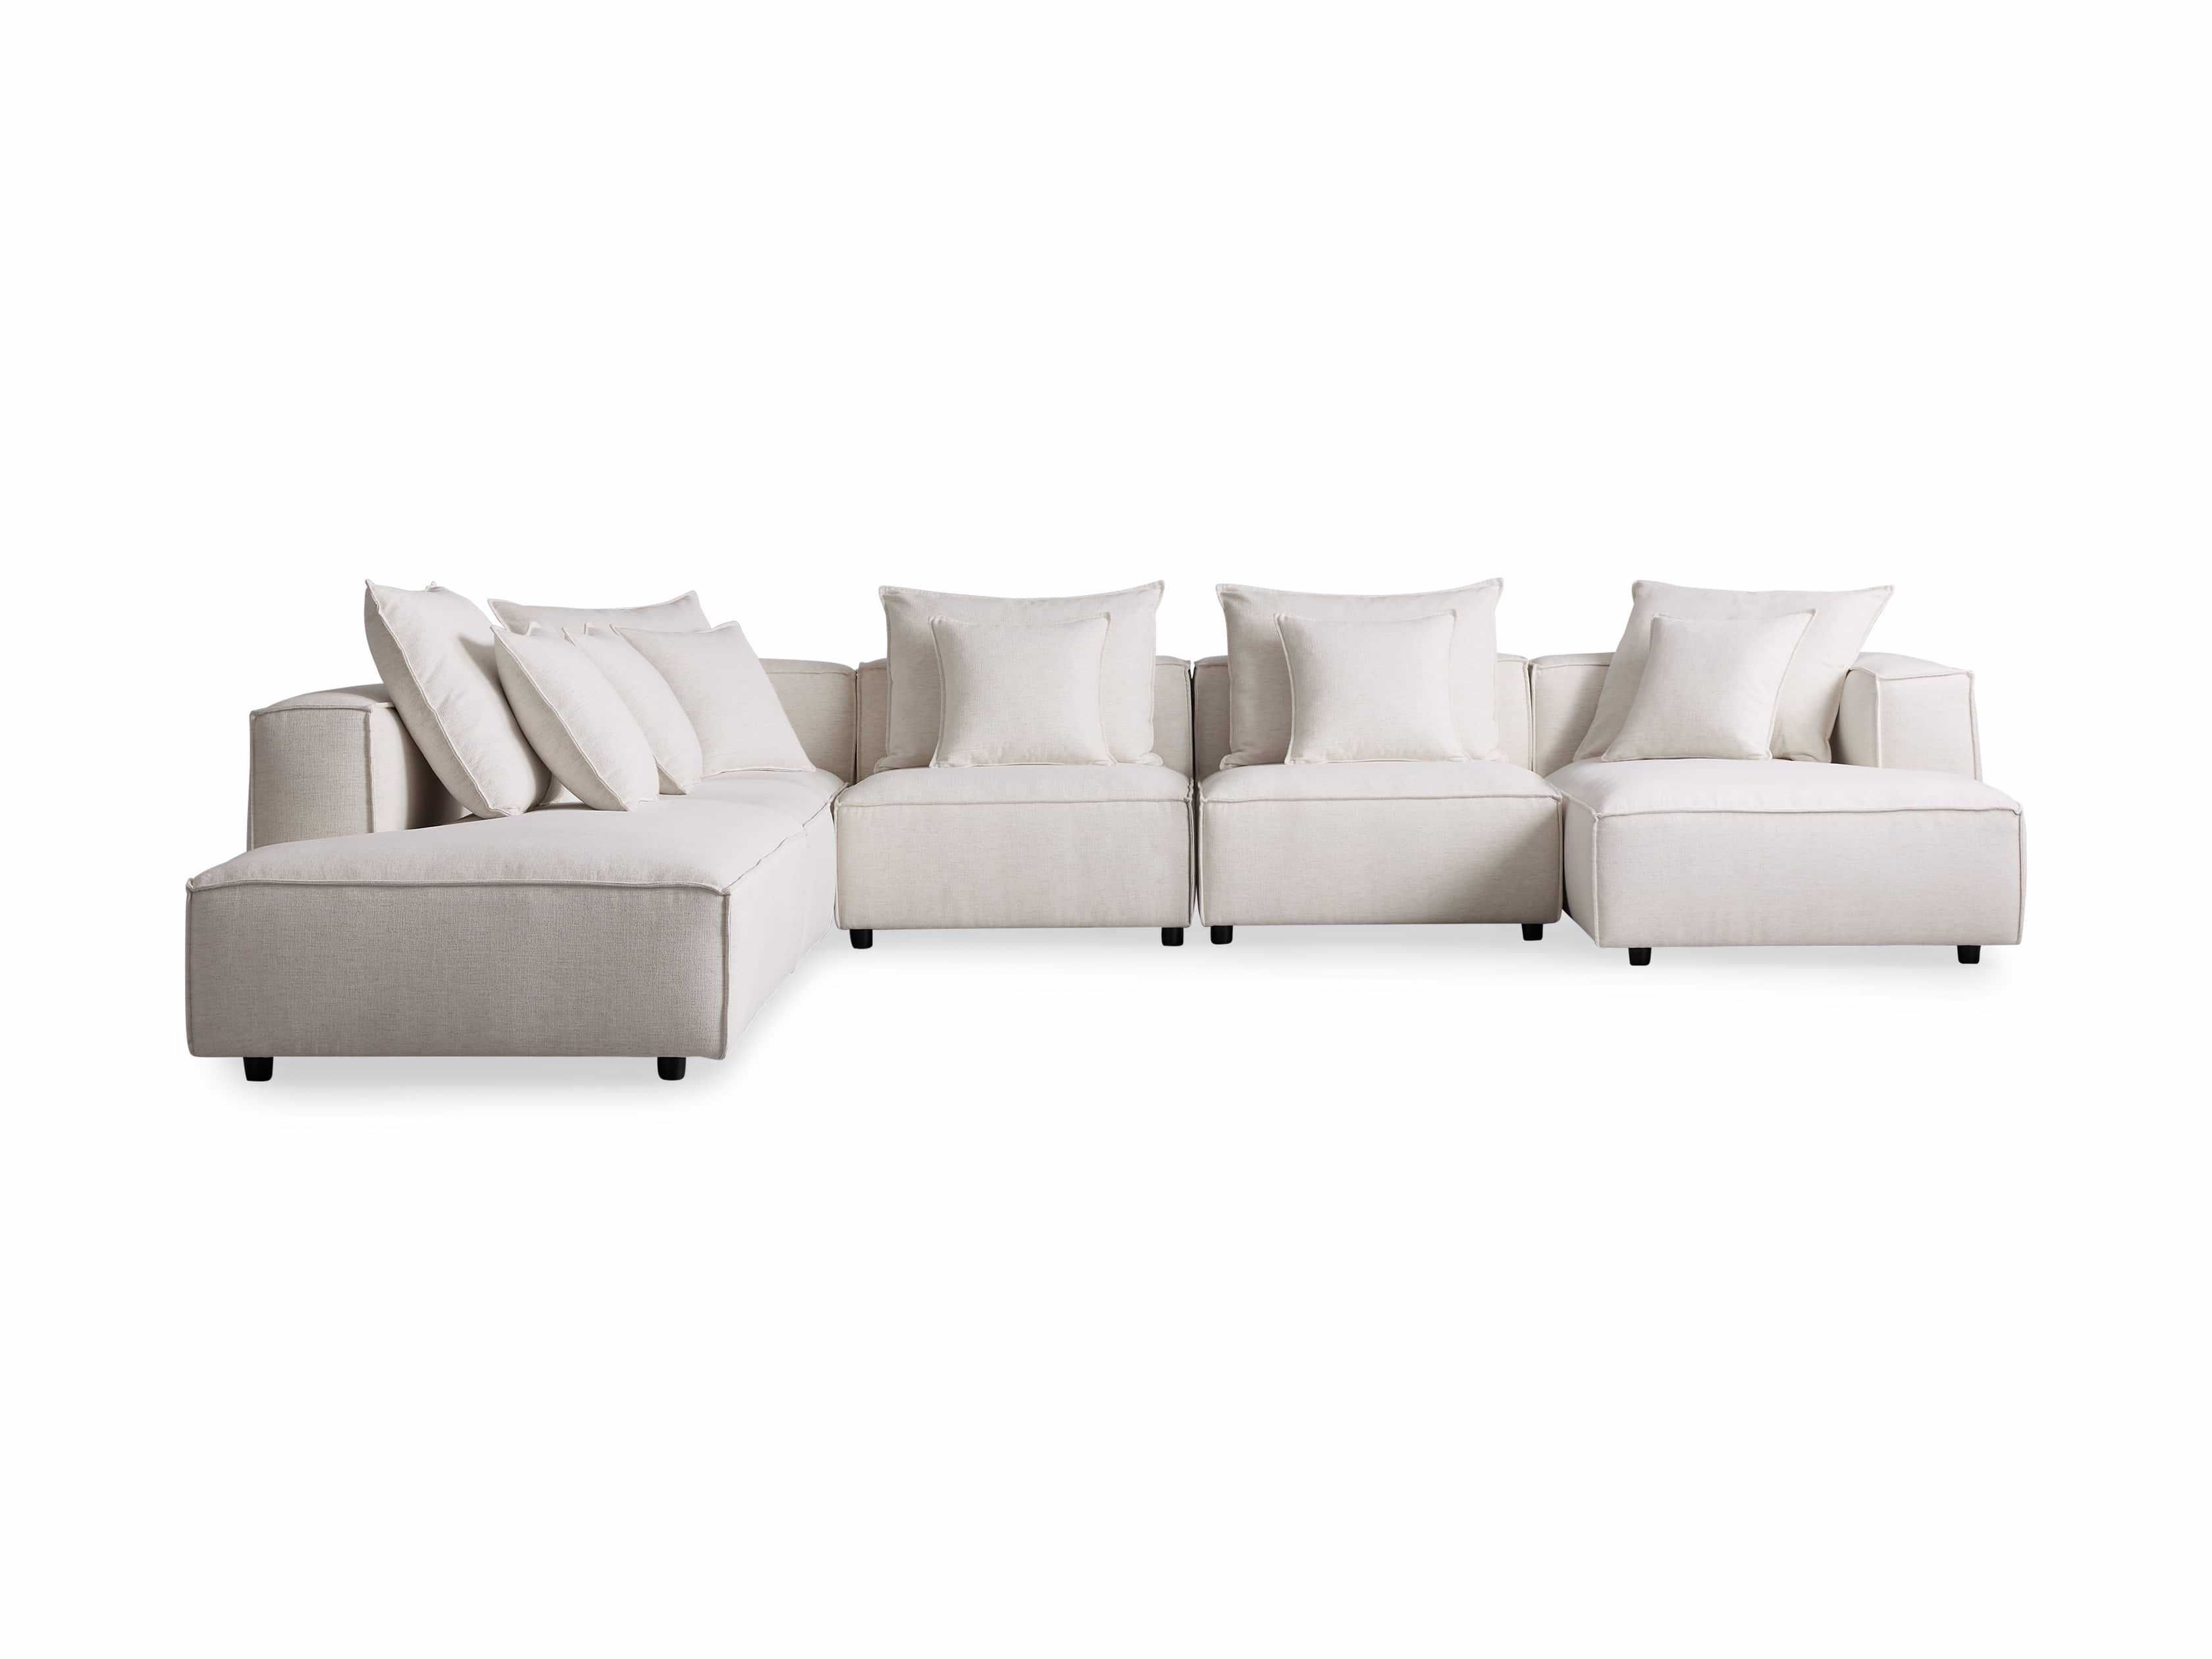 Coburn Six Piece Bumper Sectional with Chaise | Arhaus